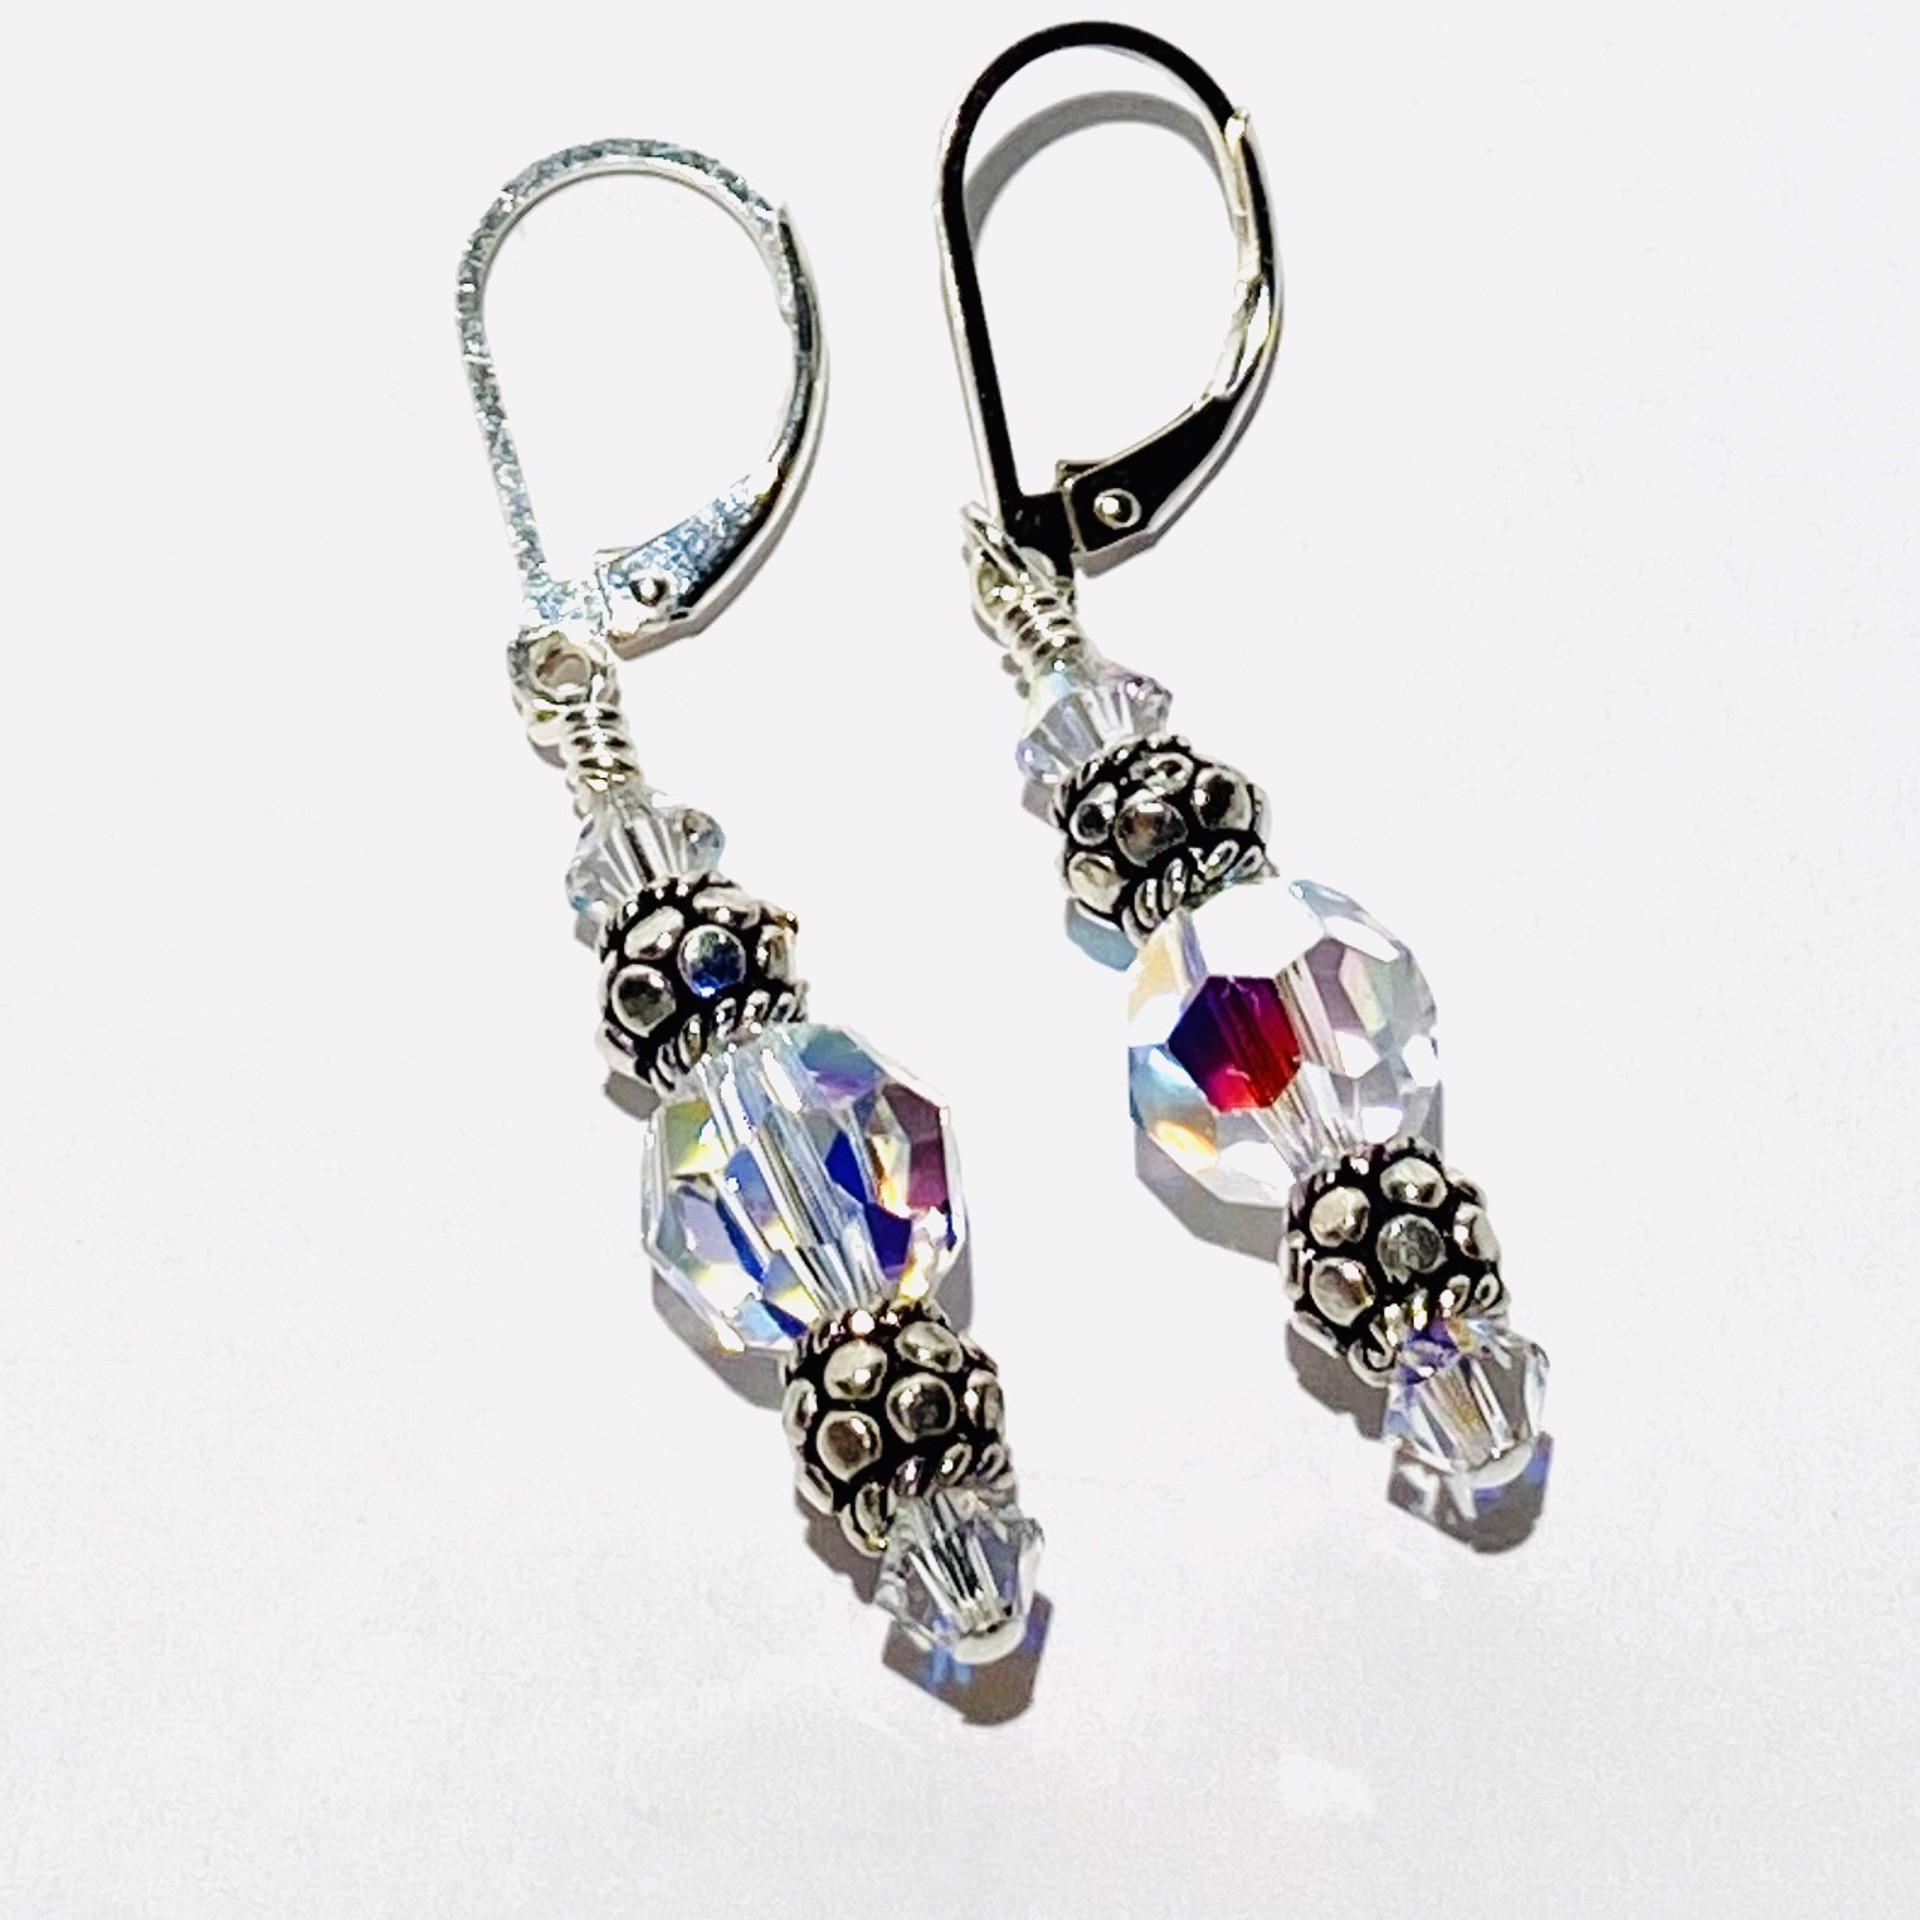 Crystal and Silver Earrings SHOSH20-74 by Shoshannah Weinisch